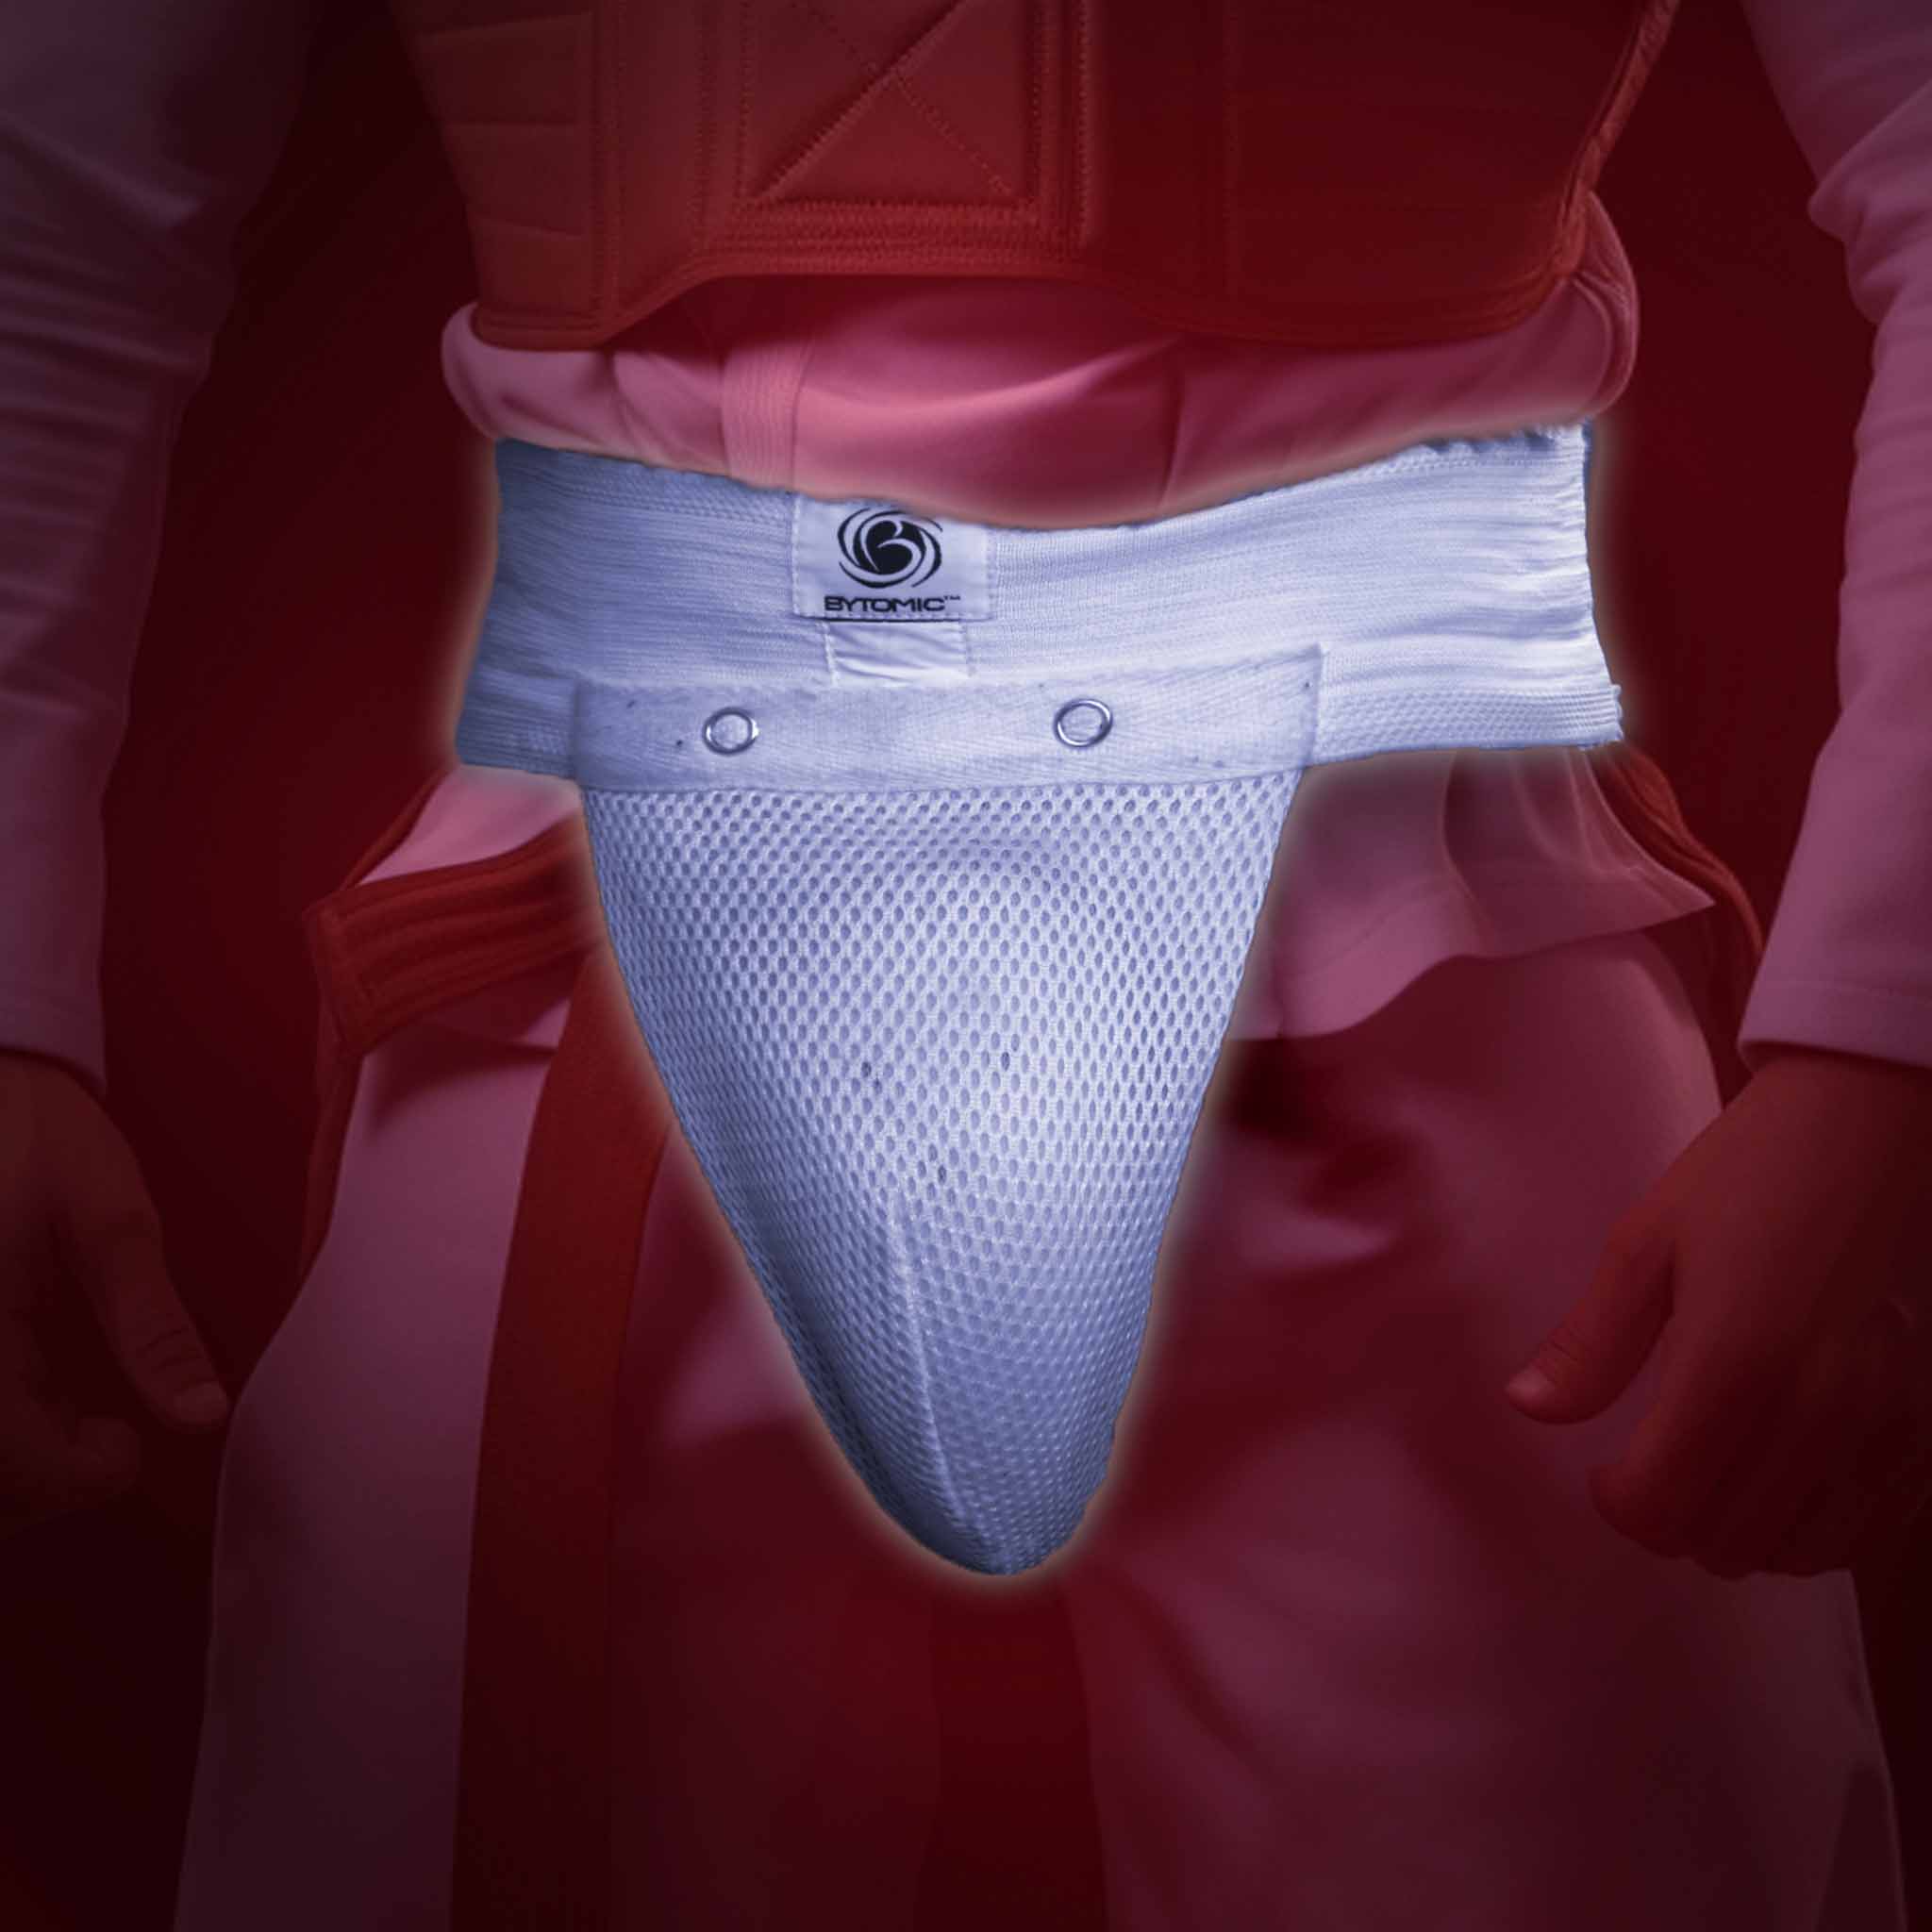 martial arts groin guard to protect that which is most precious